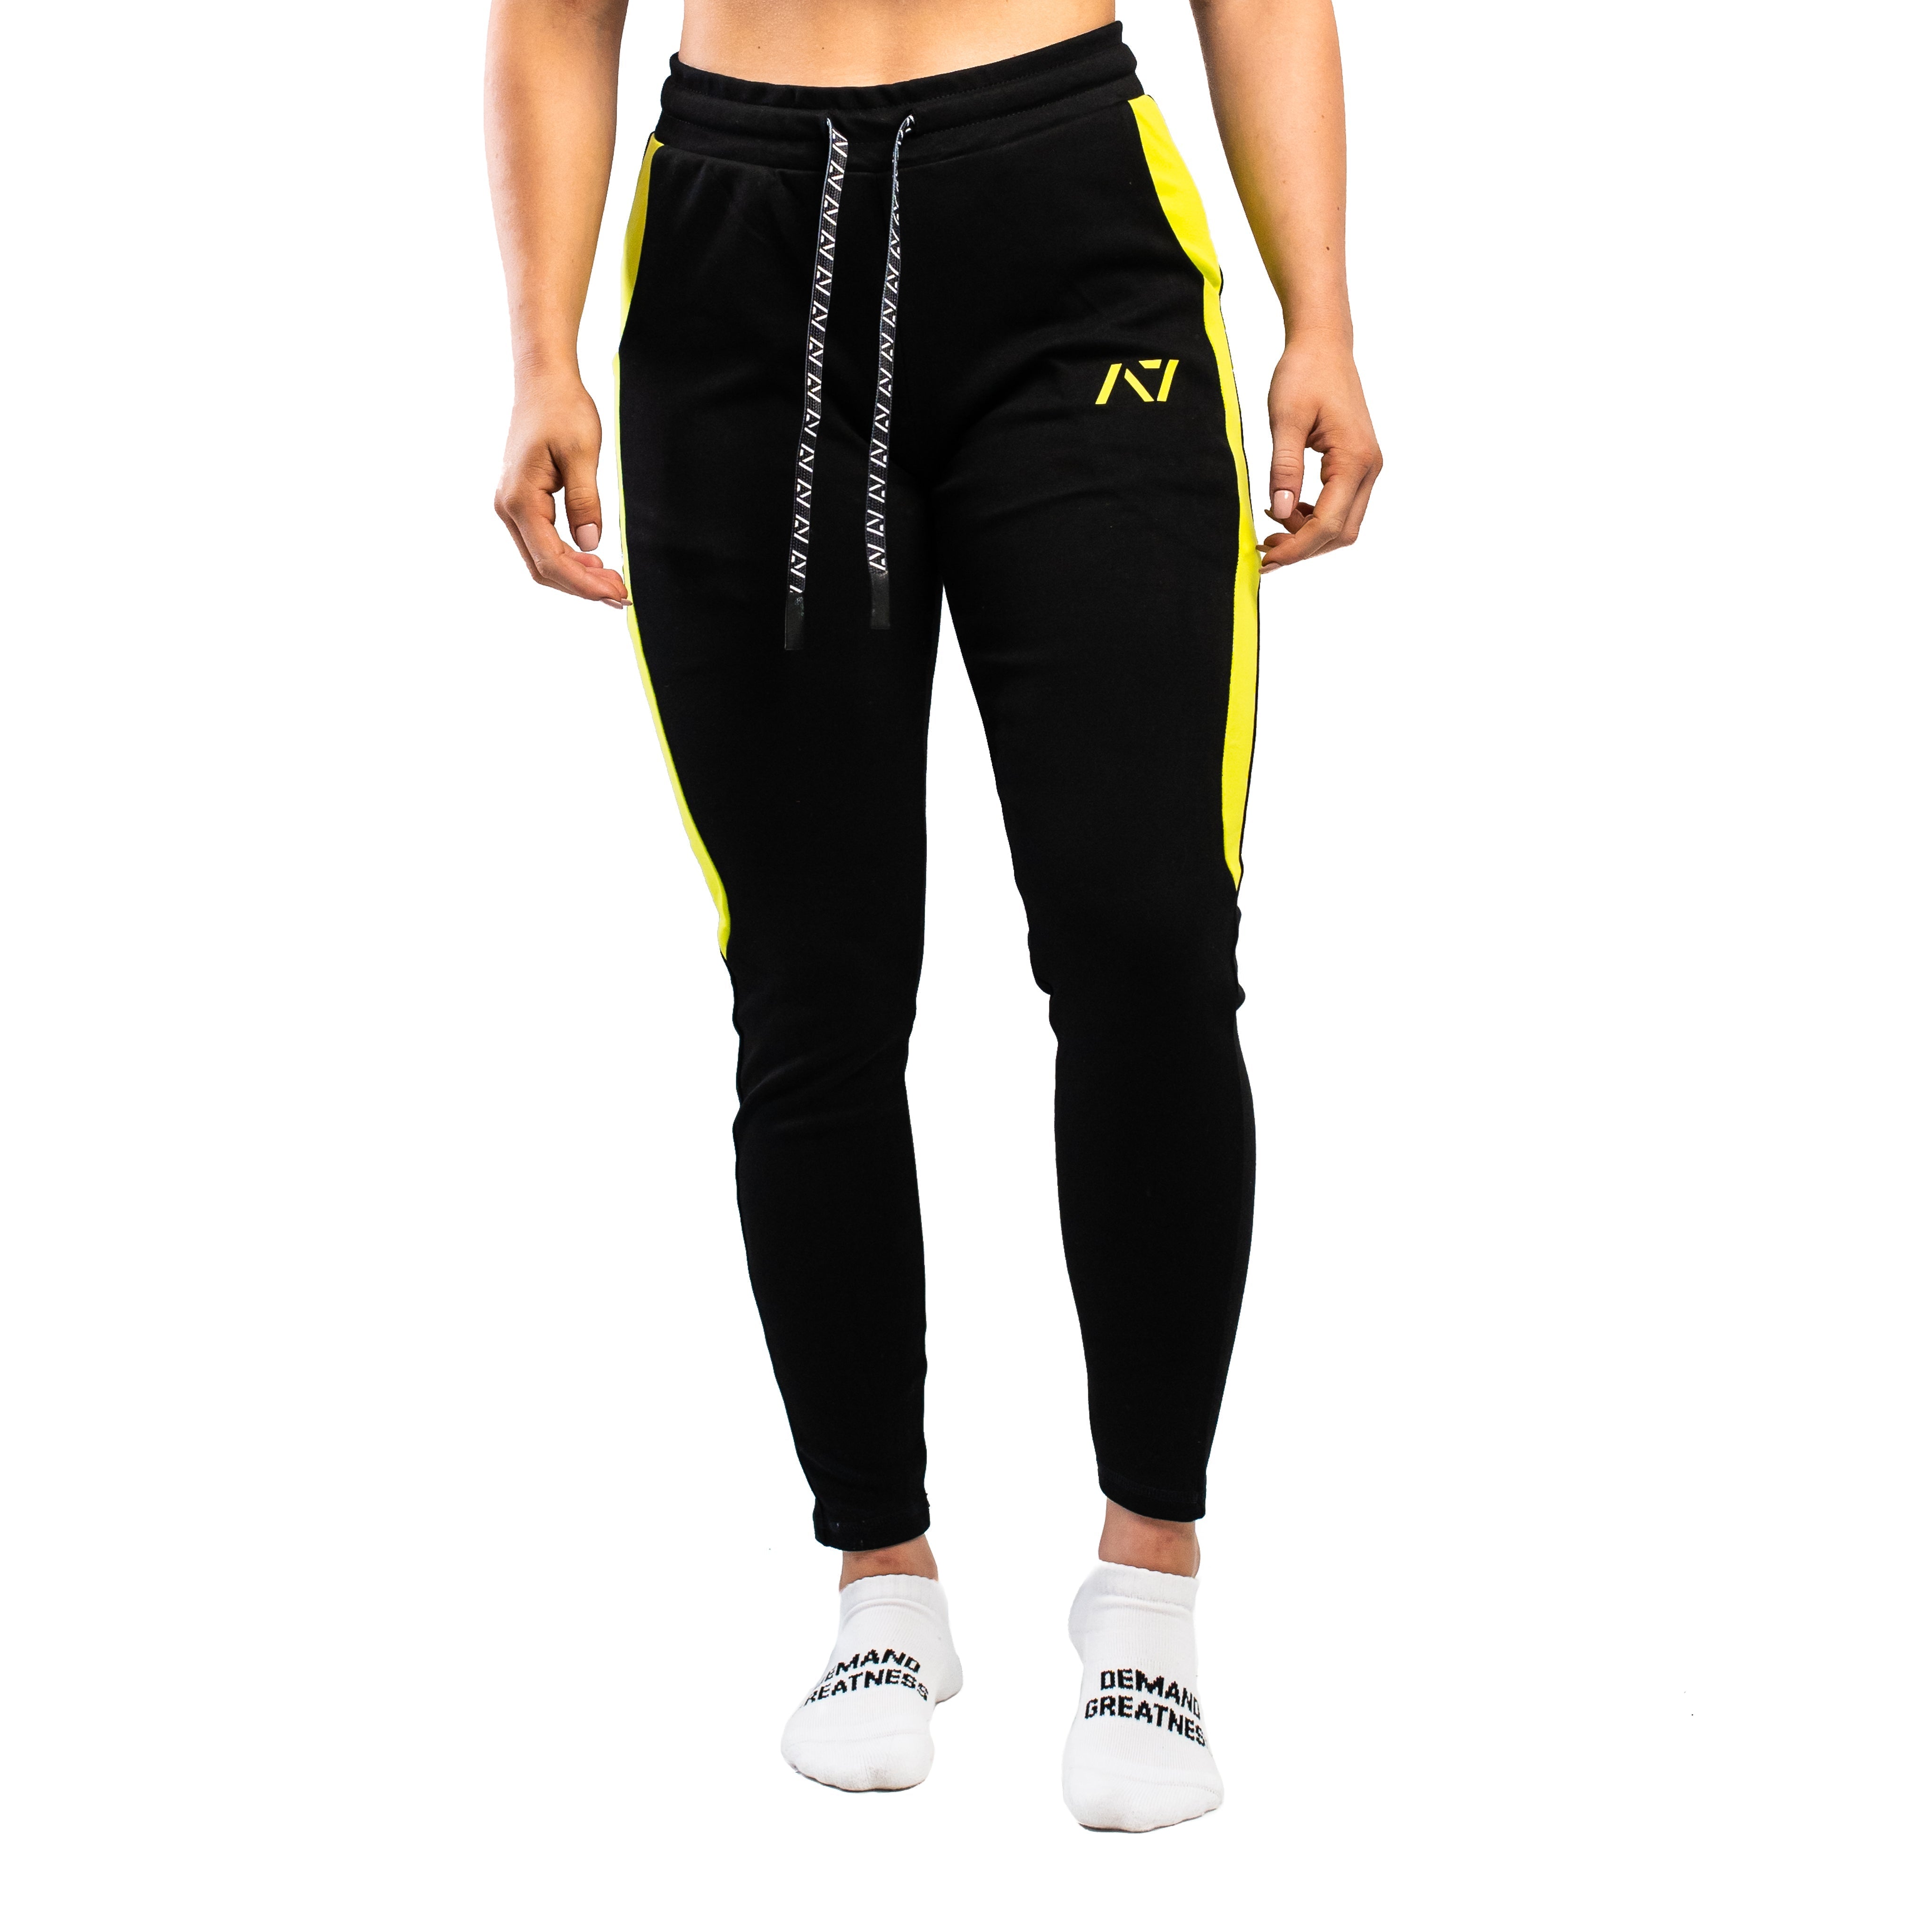 Our Moxie Joggers are made with premium cotton spandex fabric to keep you comfy throughout the day whether you are training or going out! Our Moxie Joggers contour to your body and feature a reflective stripe on both side, deep un-zippered pockets and stealth matte logos. Now in our new Inferno colourway. You can purchase Hinge Moxie joggers from A7 UK or A7 Europe. A7 UK shipping to UK, Ireland, France, Italy, Germany, the Netherlands, Sweden and Poland.